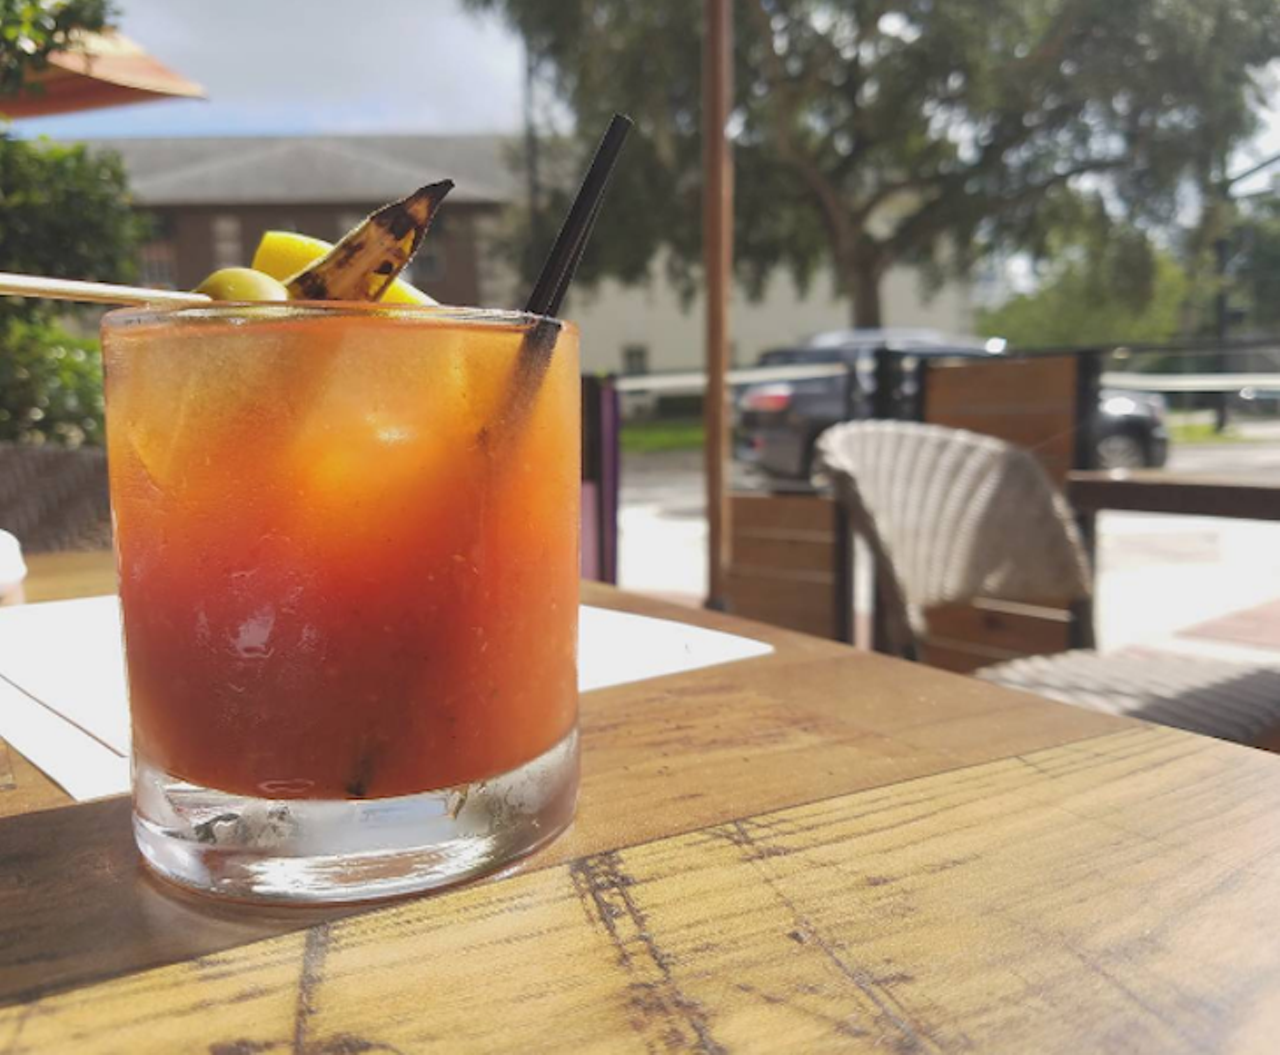 Soco Thornton Park
629 E. Central Blvd. | 407-849-1800
At Soco, you can go OG with your Bloody Mary, but we highly recommend raising the stakes with the Caesar&#151;a whirlwind of vodka, clamato, horseradish, Sriracha and OBC Dry Porter. 
Photo via onedrunkgirl/Instagram